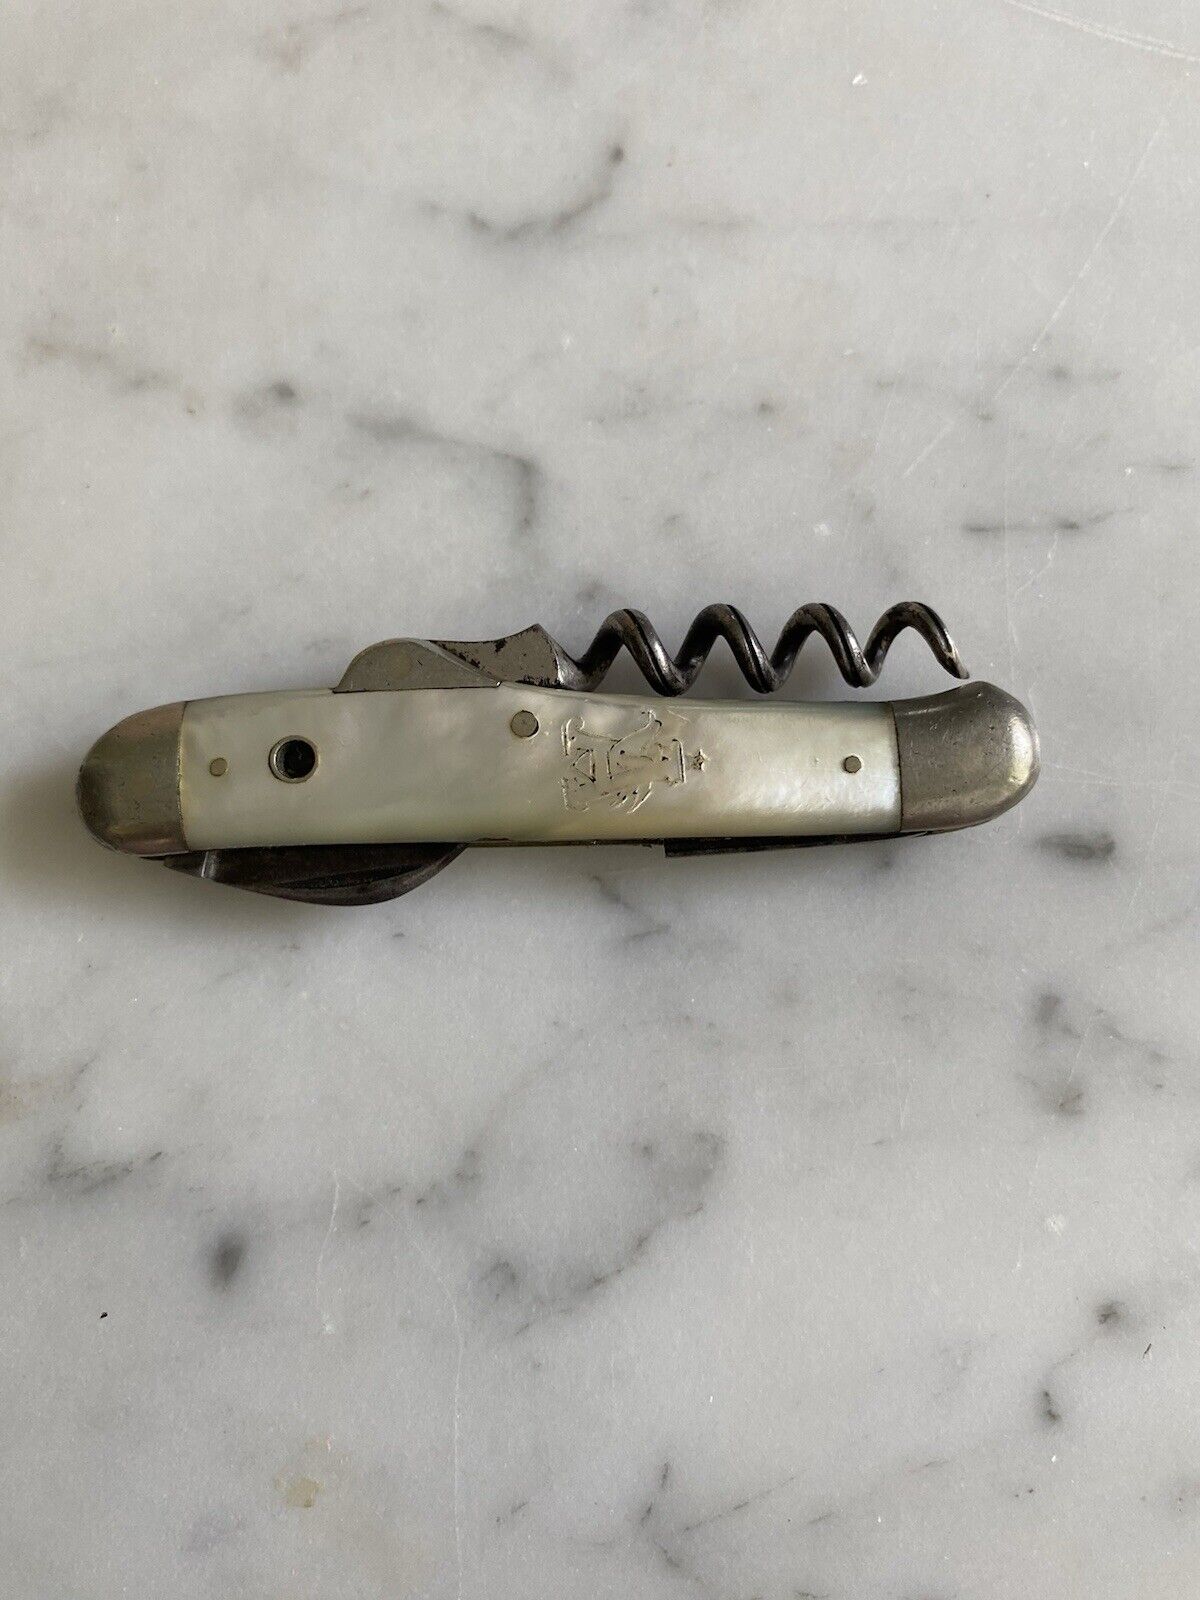 RARE Anheuser-Busch Germany Mother Of Pearl Knife 1890s-1910 corkscrew